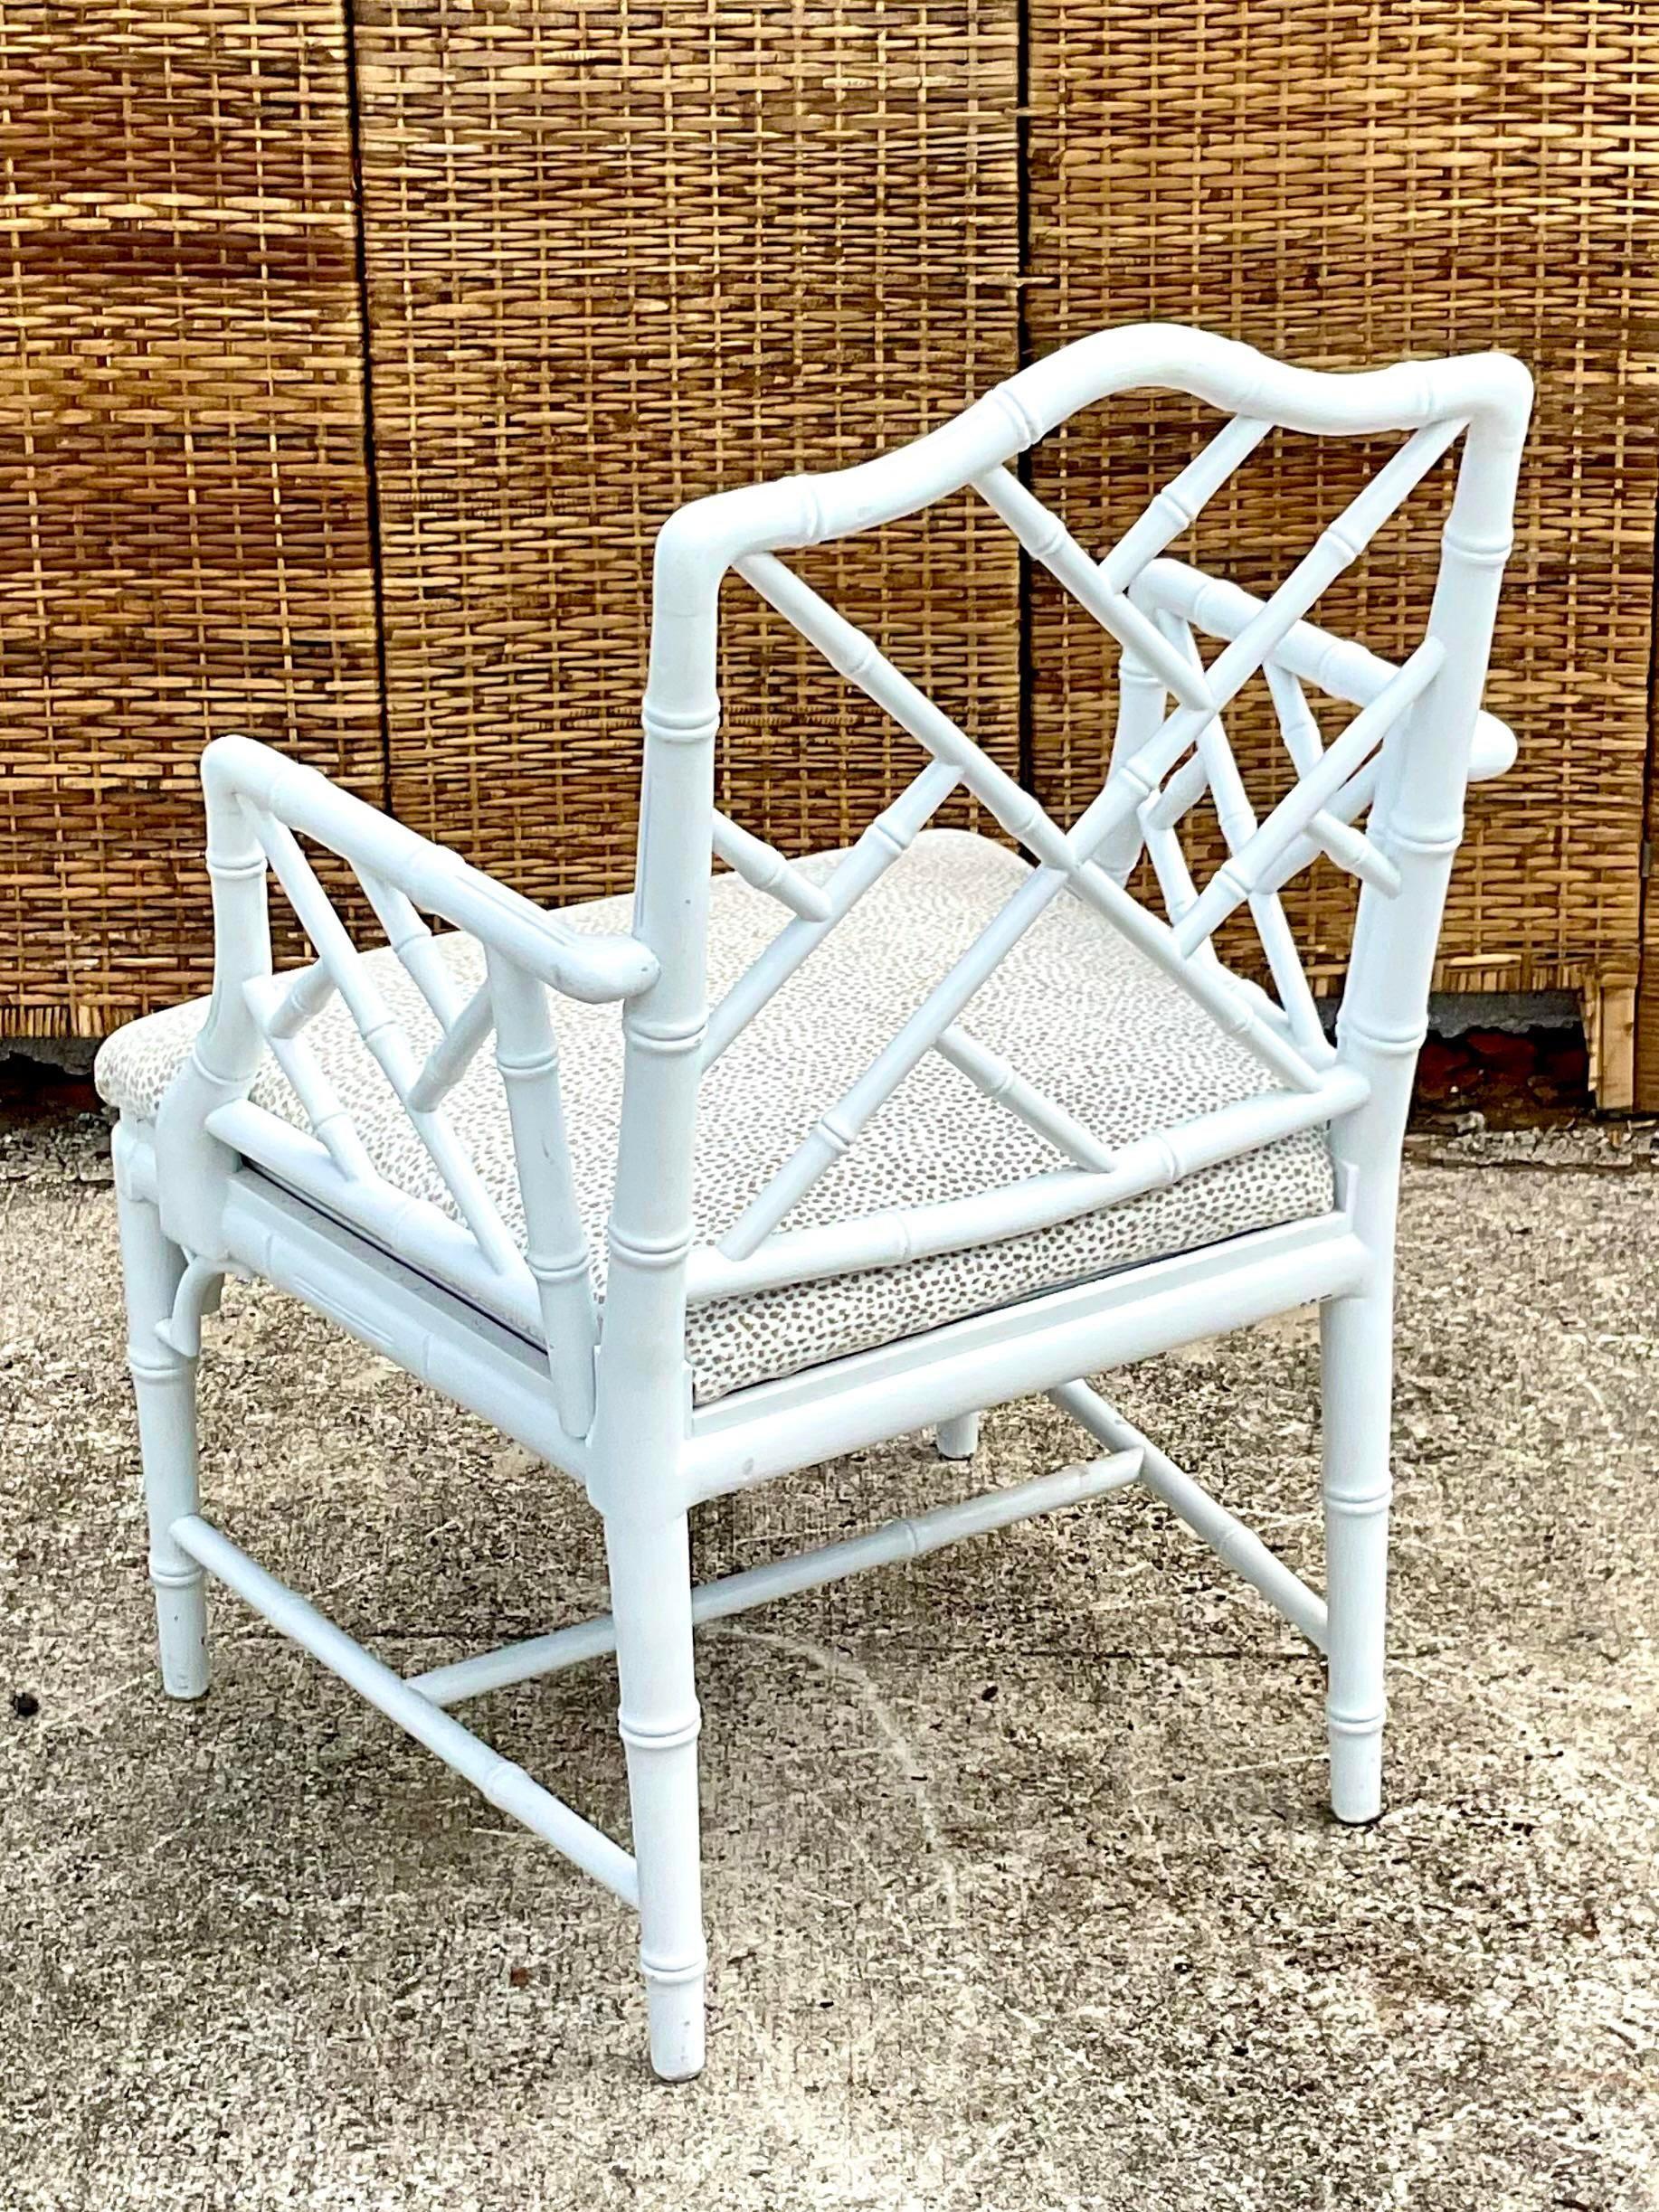 Fabulous pair of vintage Coastal arm chairs. Beautiful high gloss white lacquered finish. The iconic Chinese Chippendale design on the frame. A beautiful neutral dots upholstery make these an easy addition to any decor. Acquired from a Palm Beach